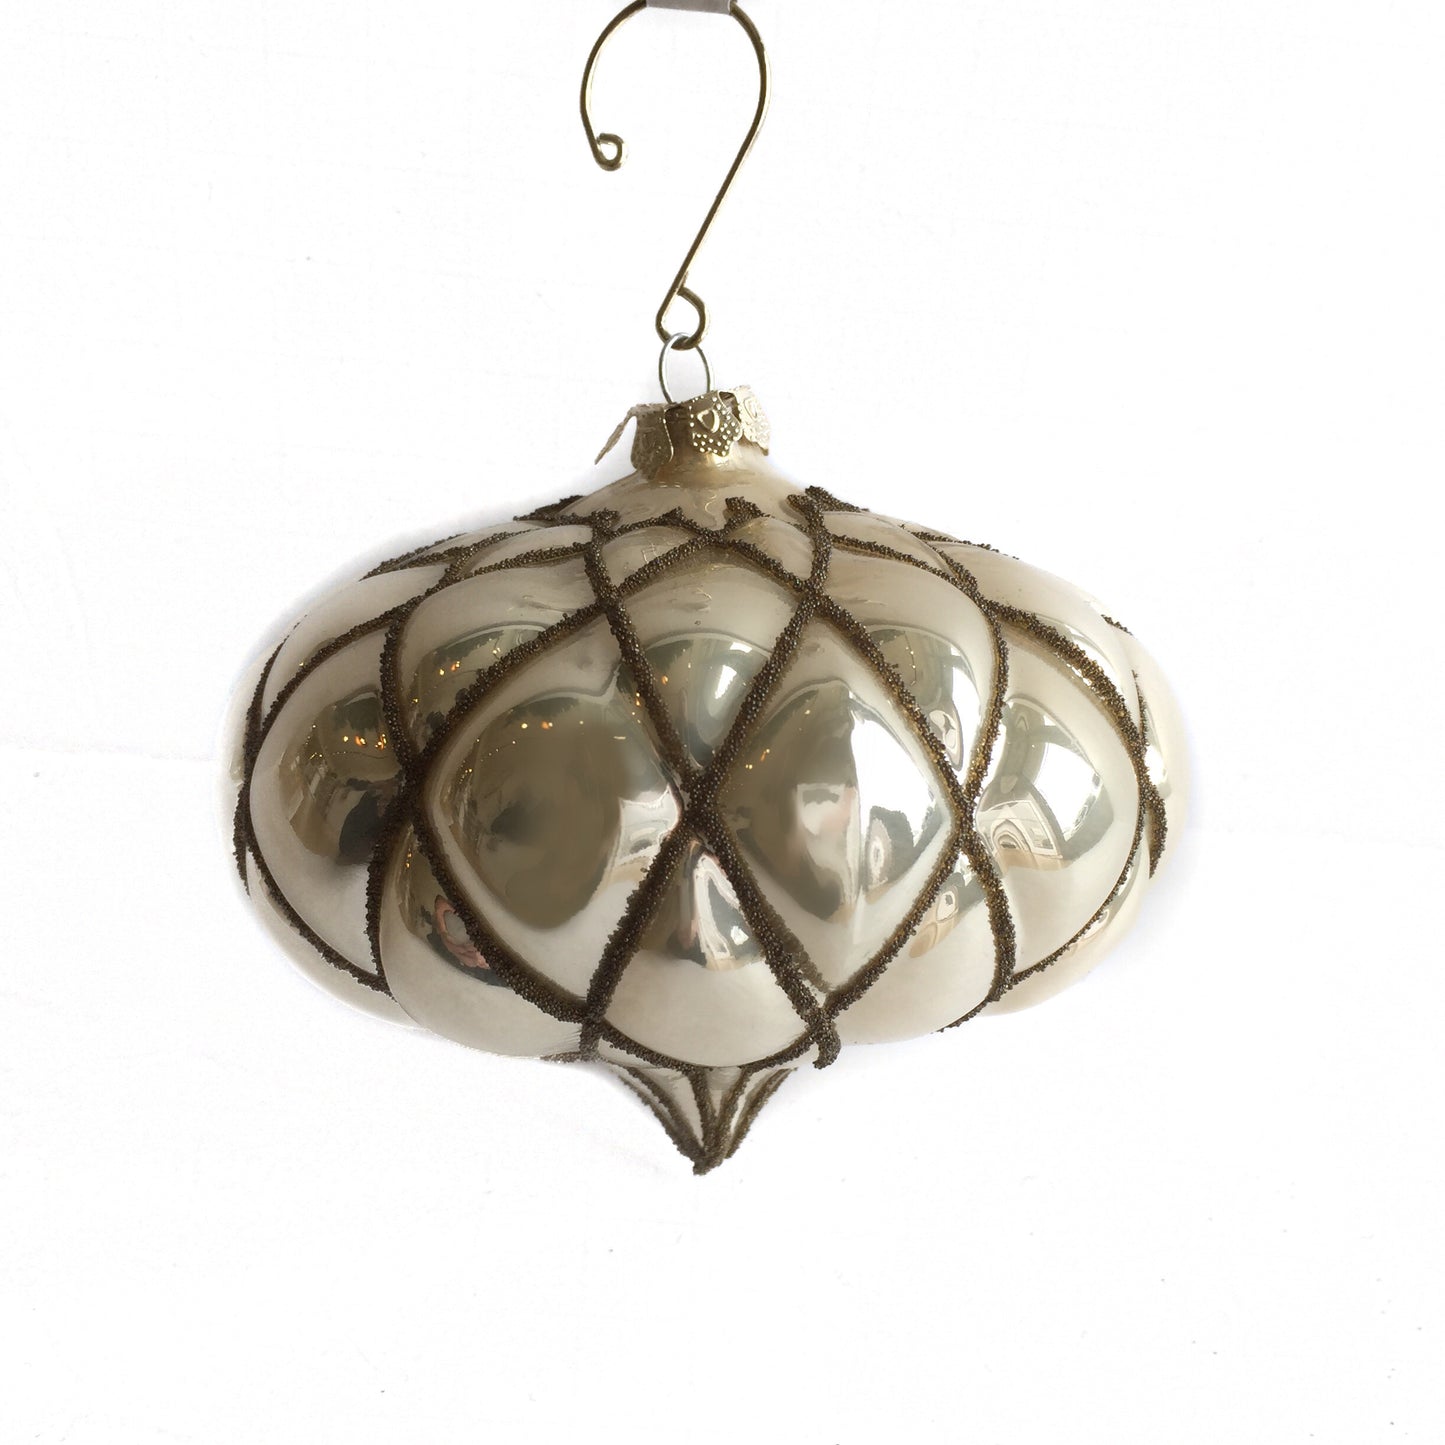 Glass Tufted Onion Ornament